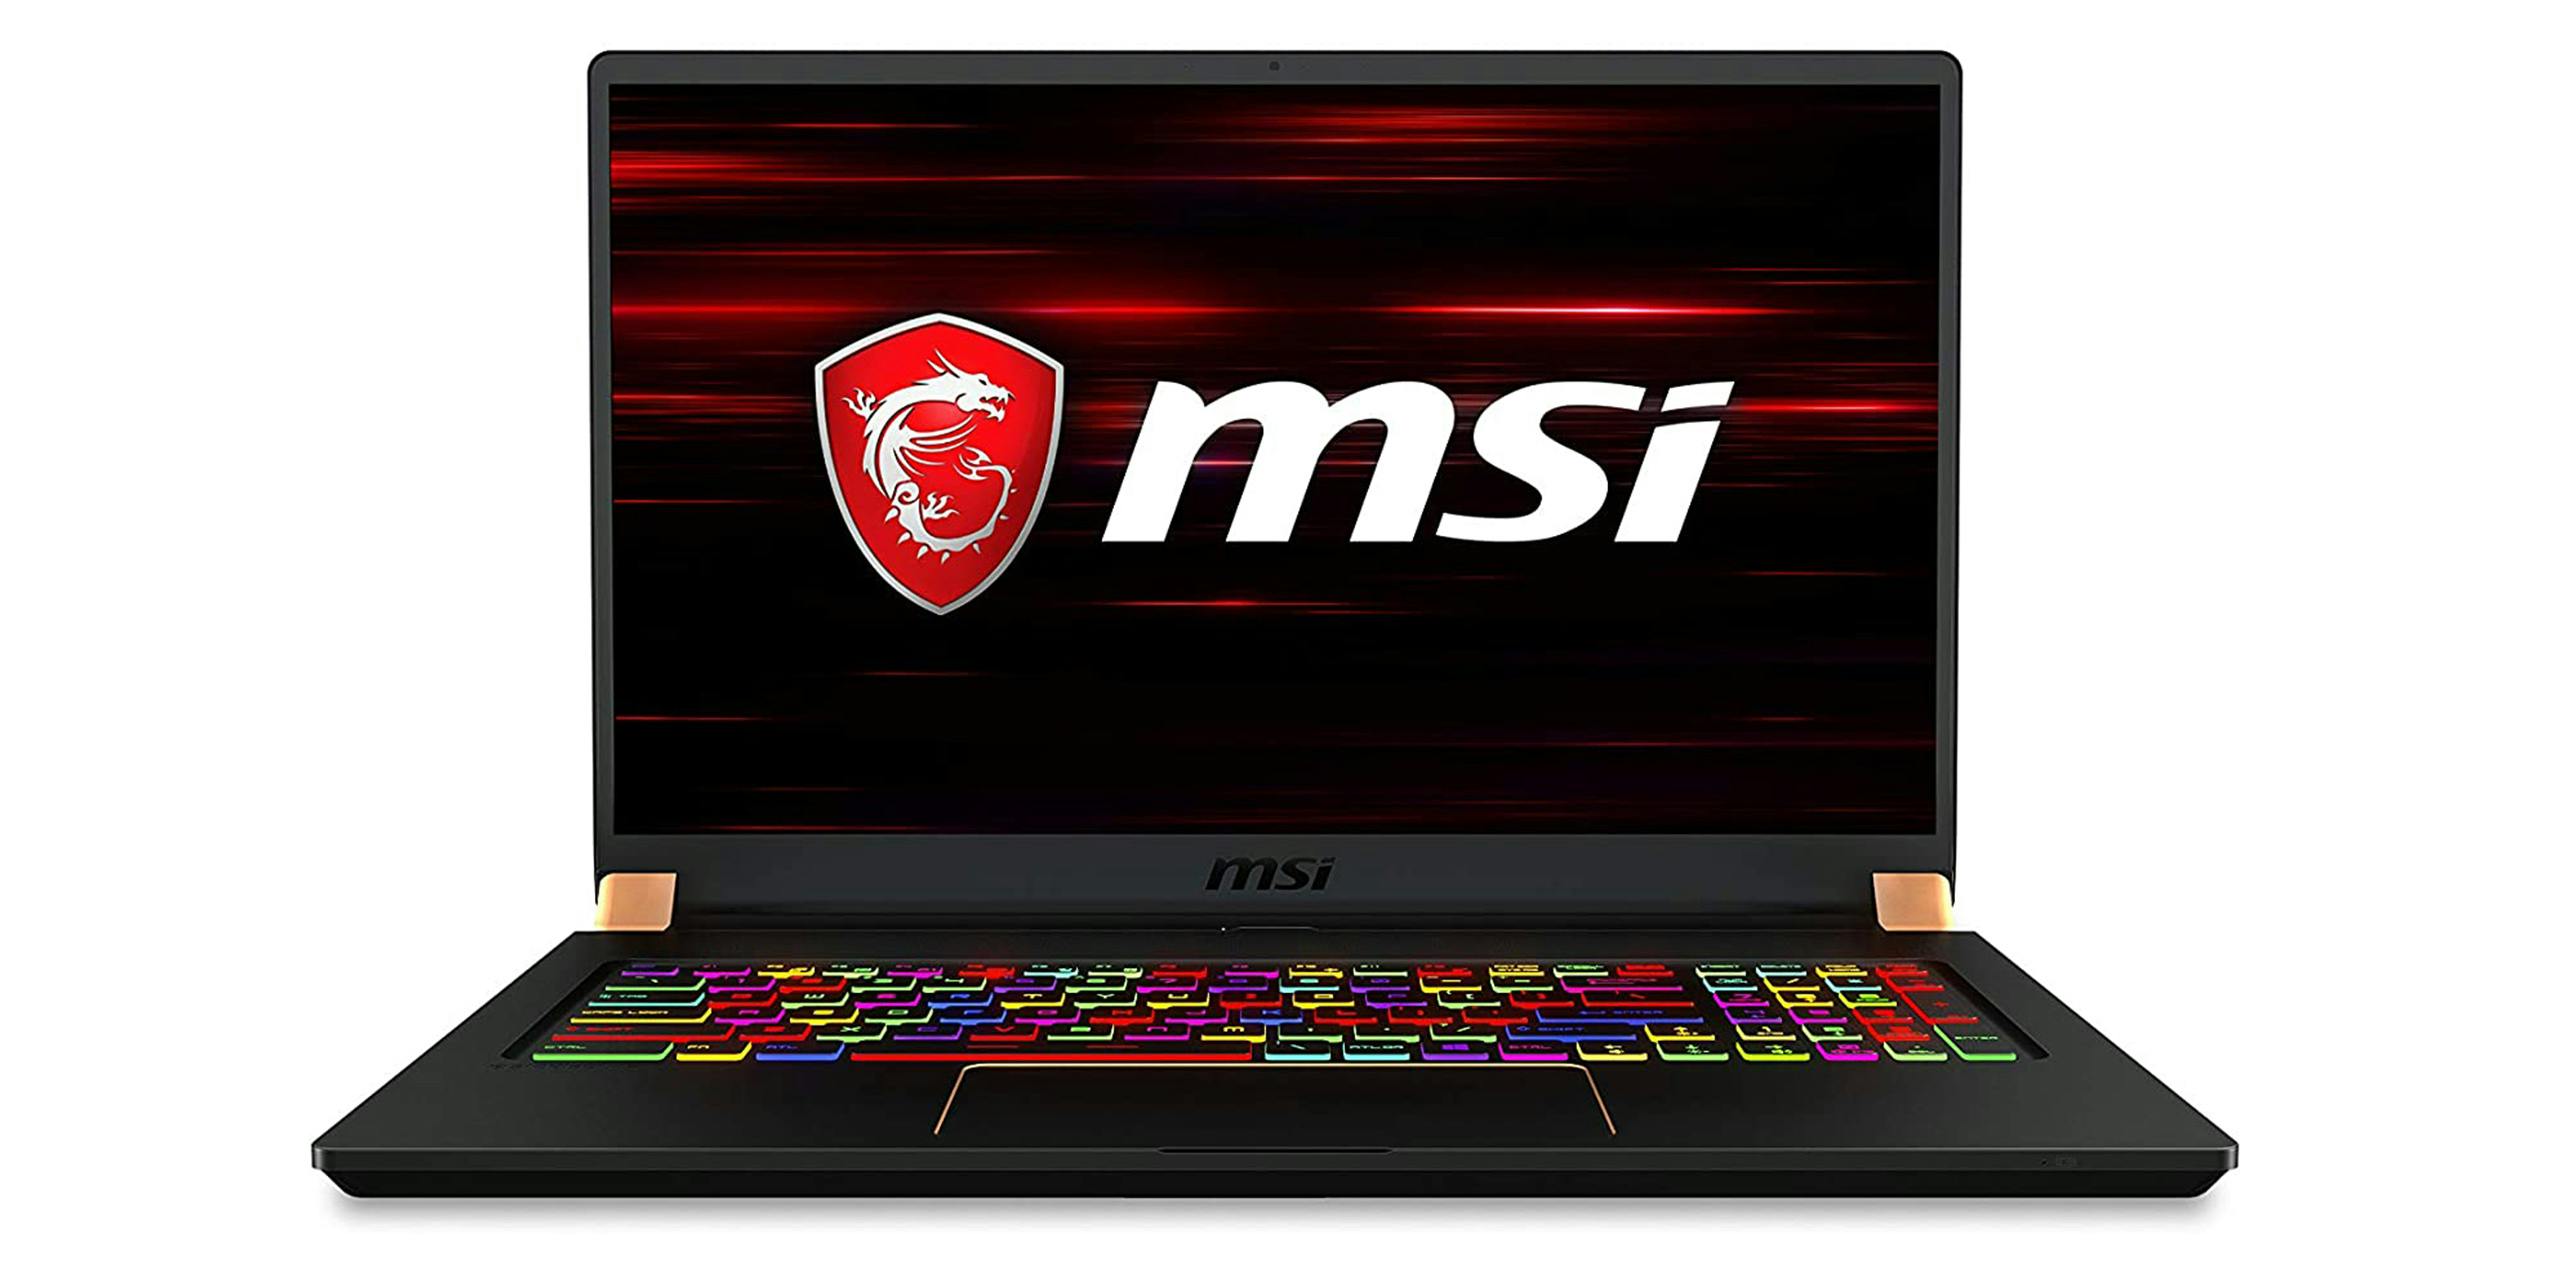 MSI gaming laptop product image. This is one of the best gaming devices available on Amazon.